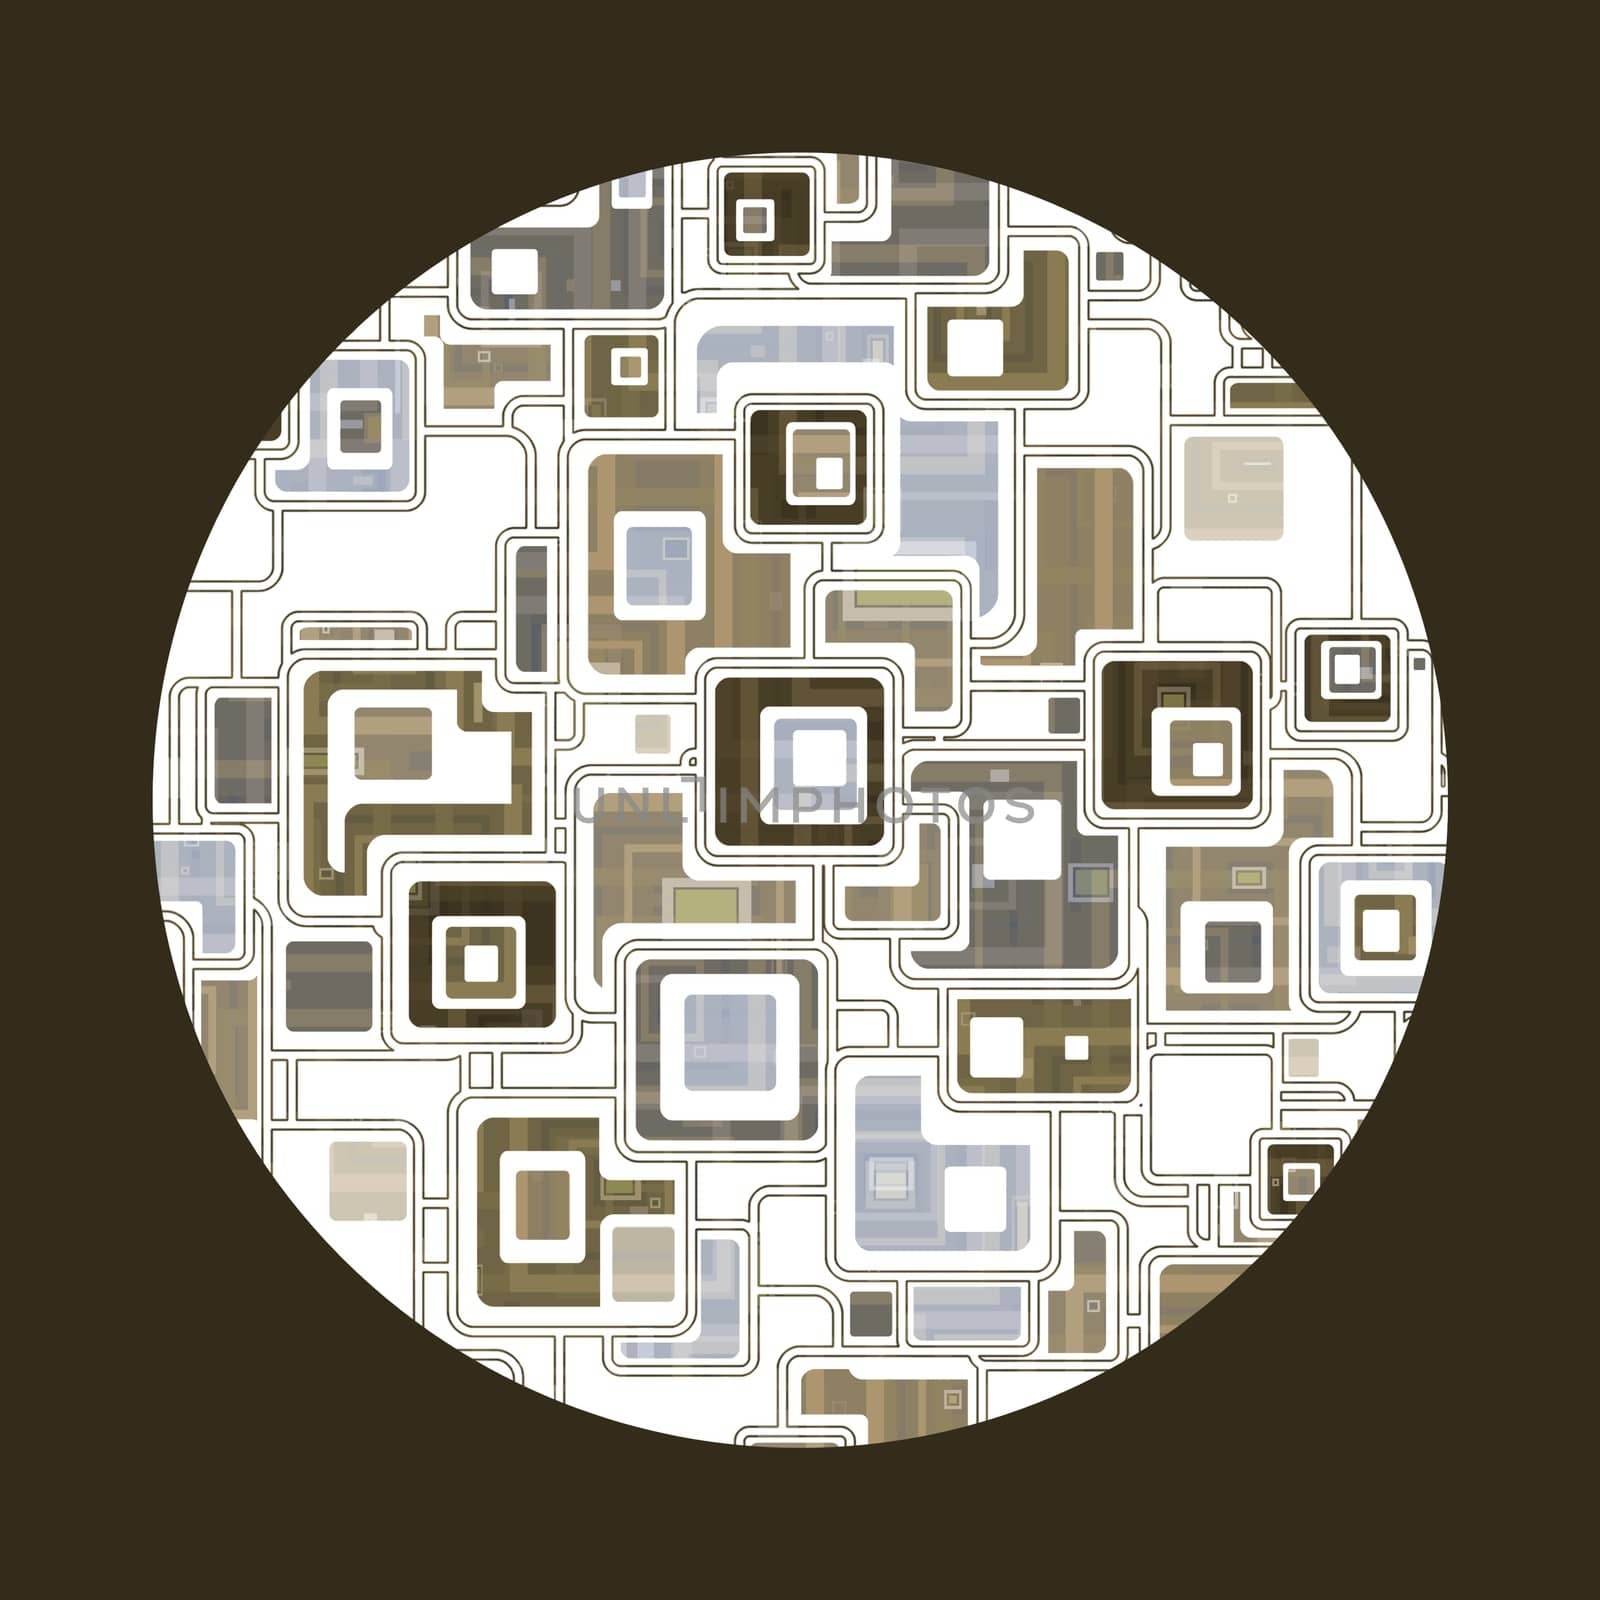 Abstract Illustration of a retro round shape with squares inside